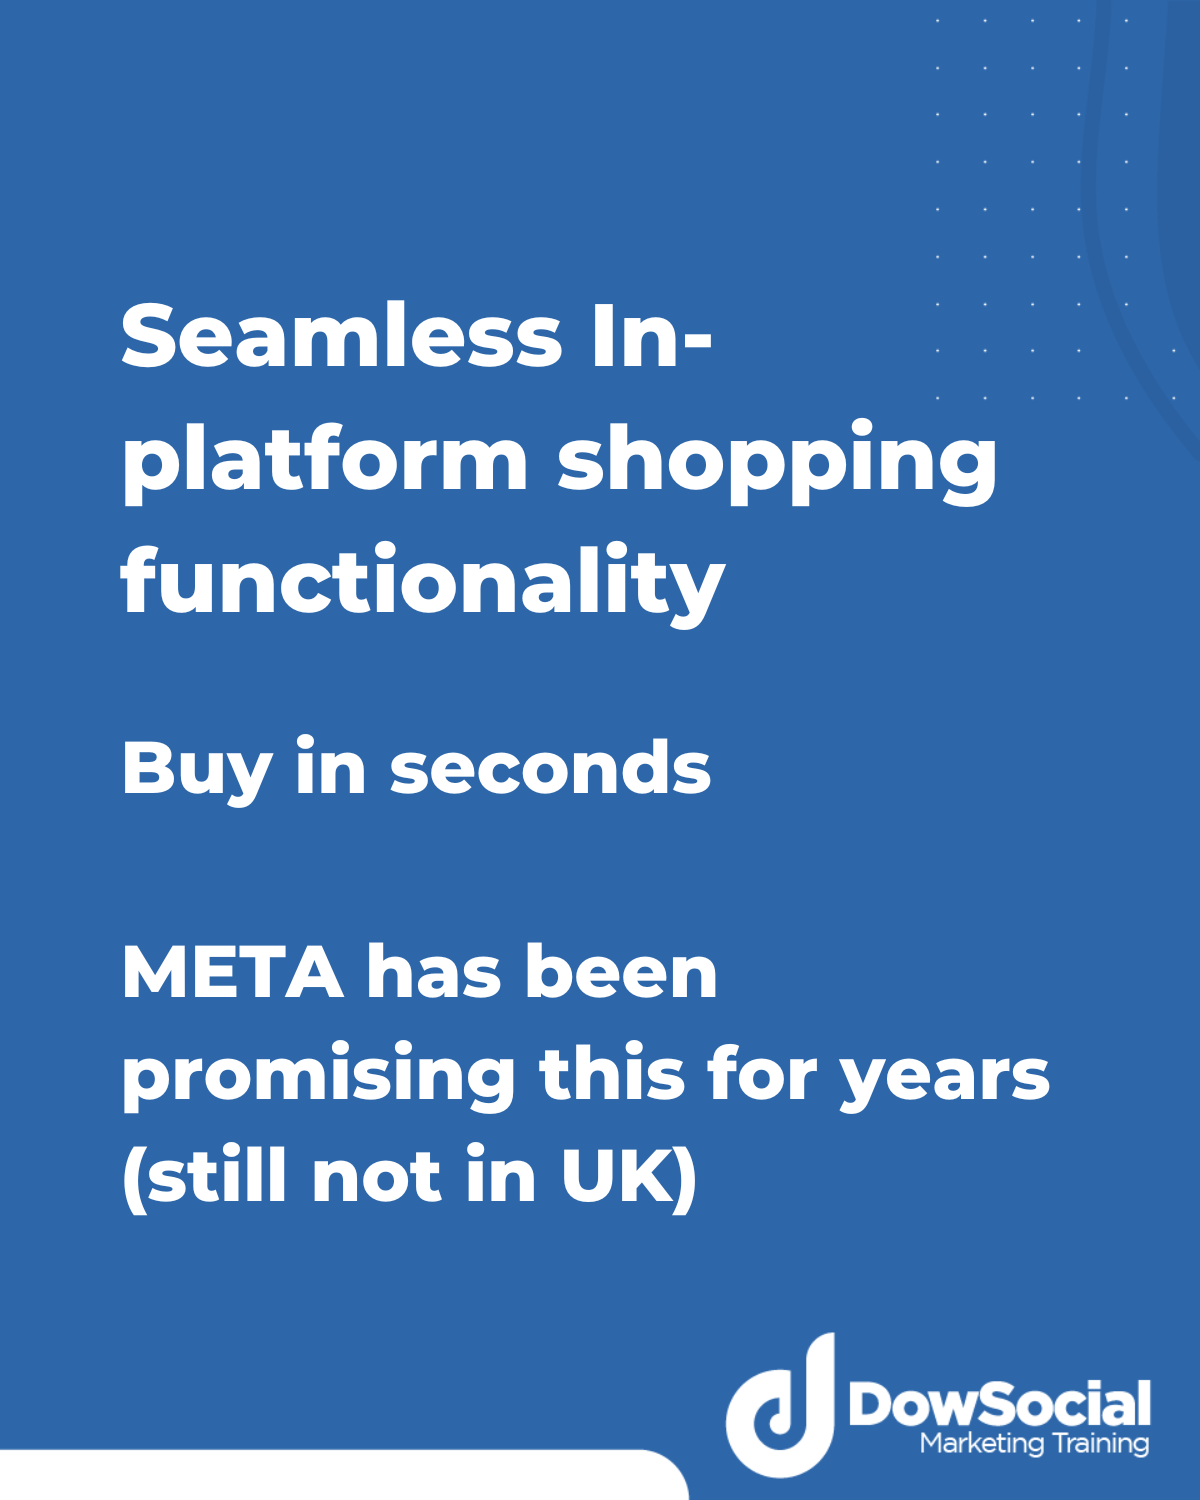 Seamless In-platform shopping functionality Buy in seconds META has been promising this for years (still not in UK)